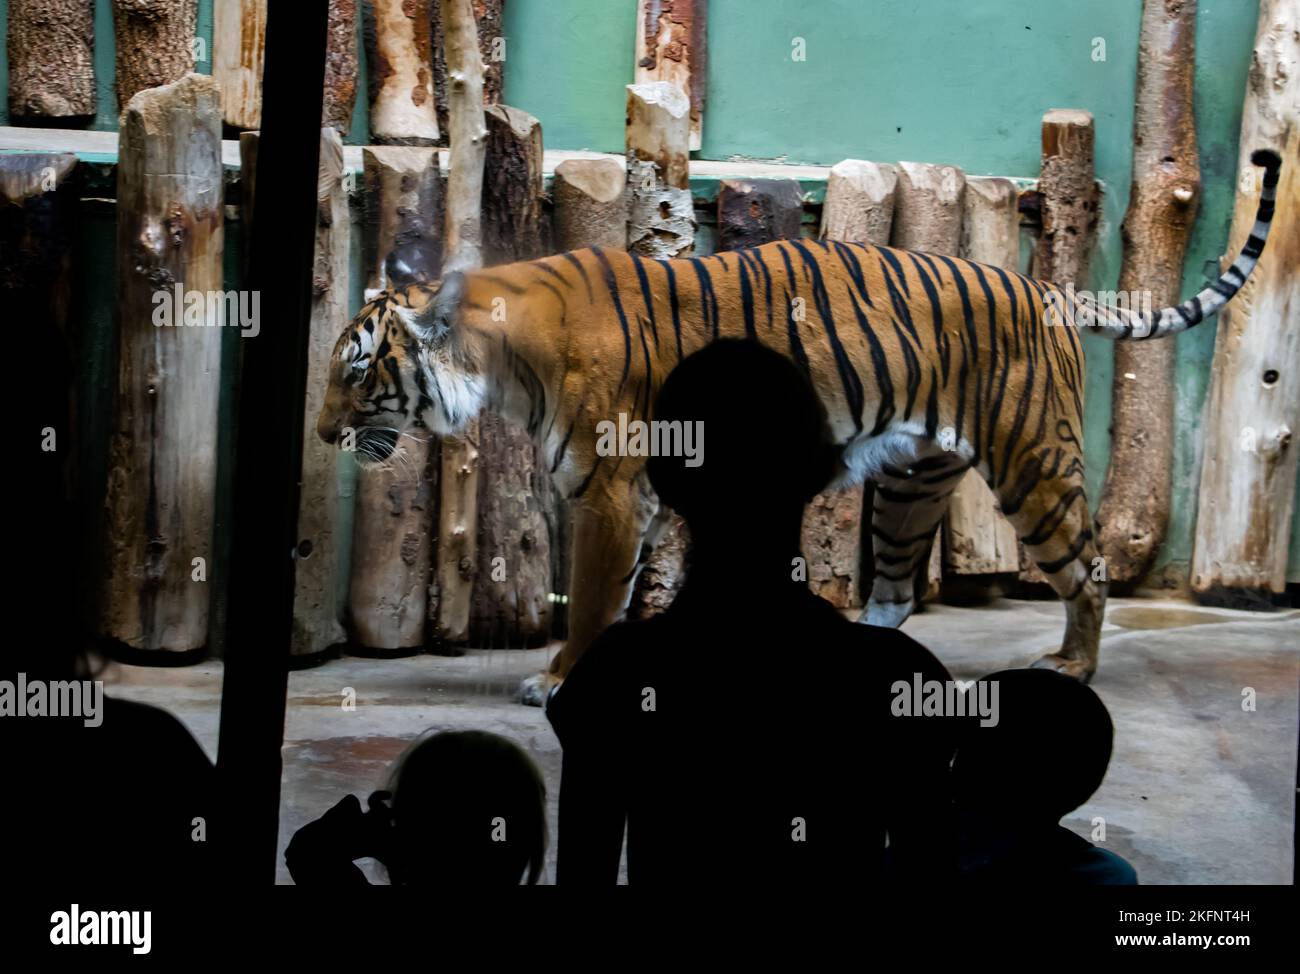 A visitors at the zoo observe a tiger in a cage Stock Photo